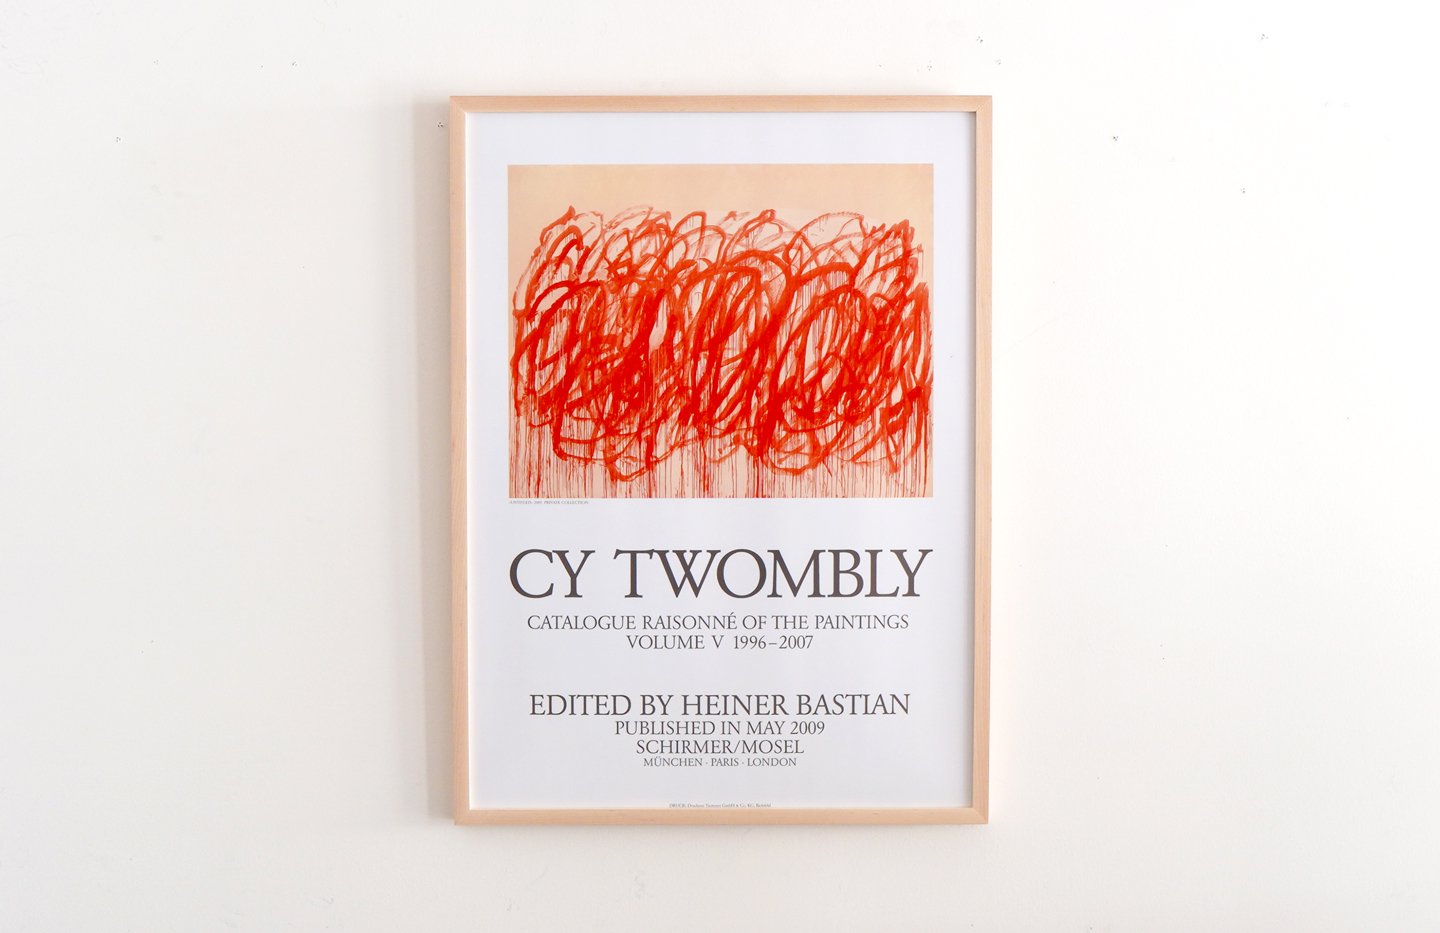 Cy Twombly / Catalogue Raisonné of the Paintings Vol.V - サイ